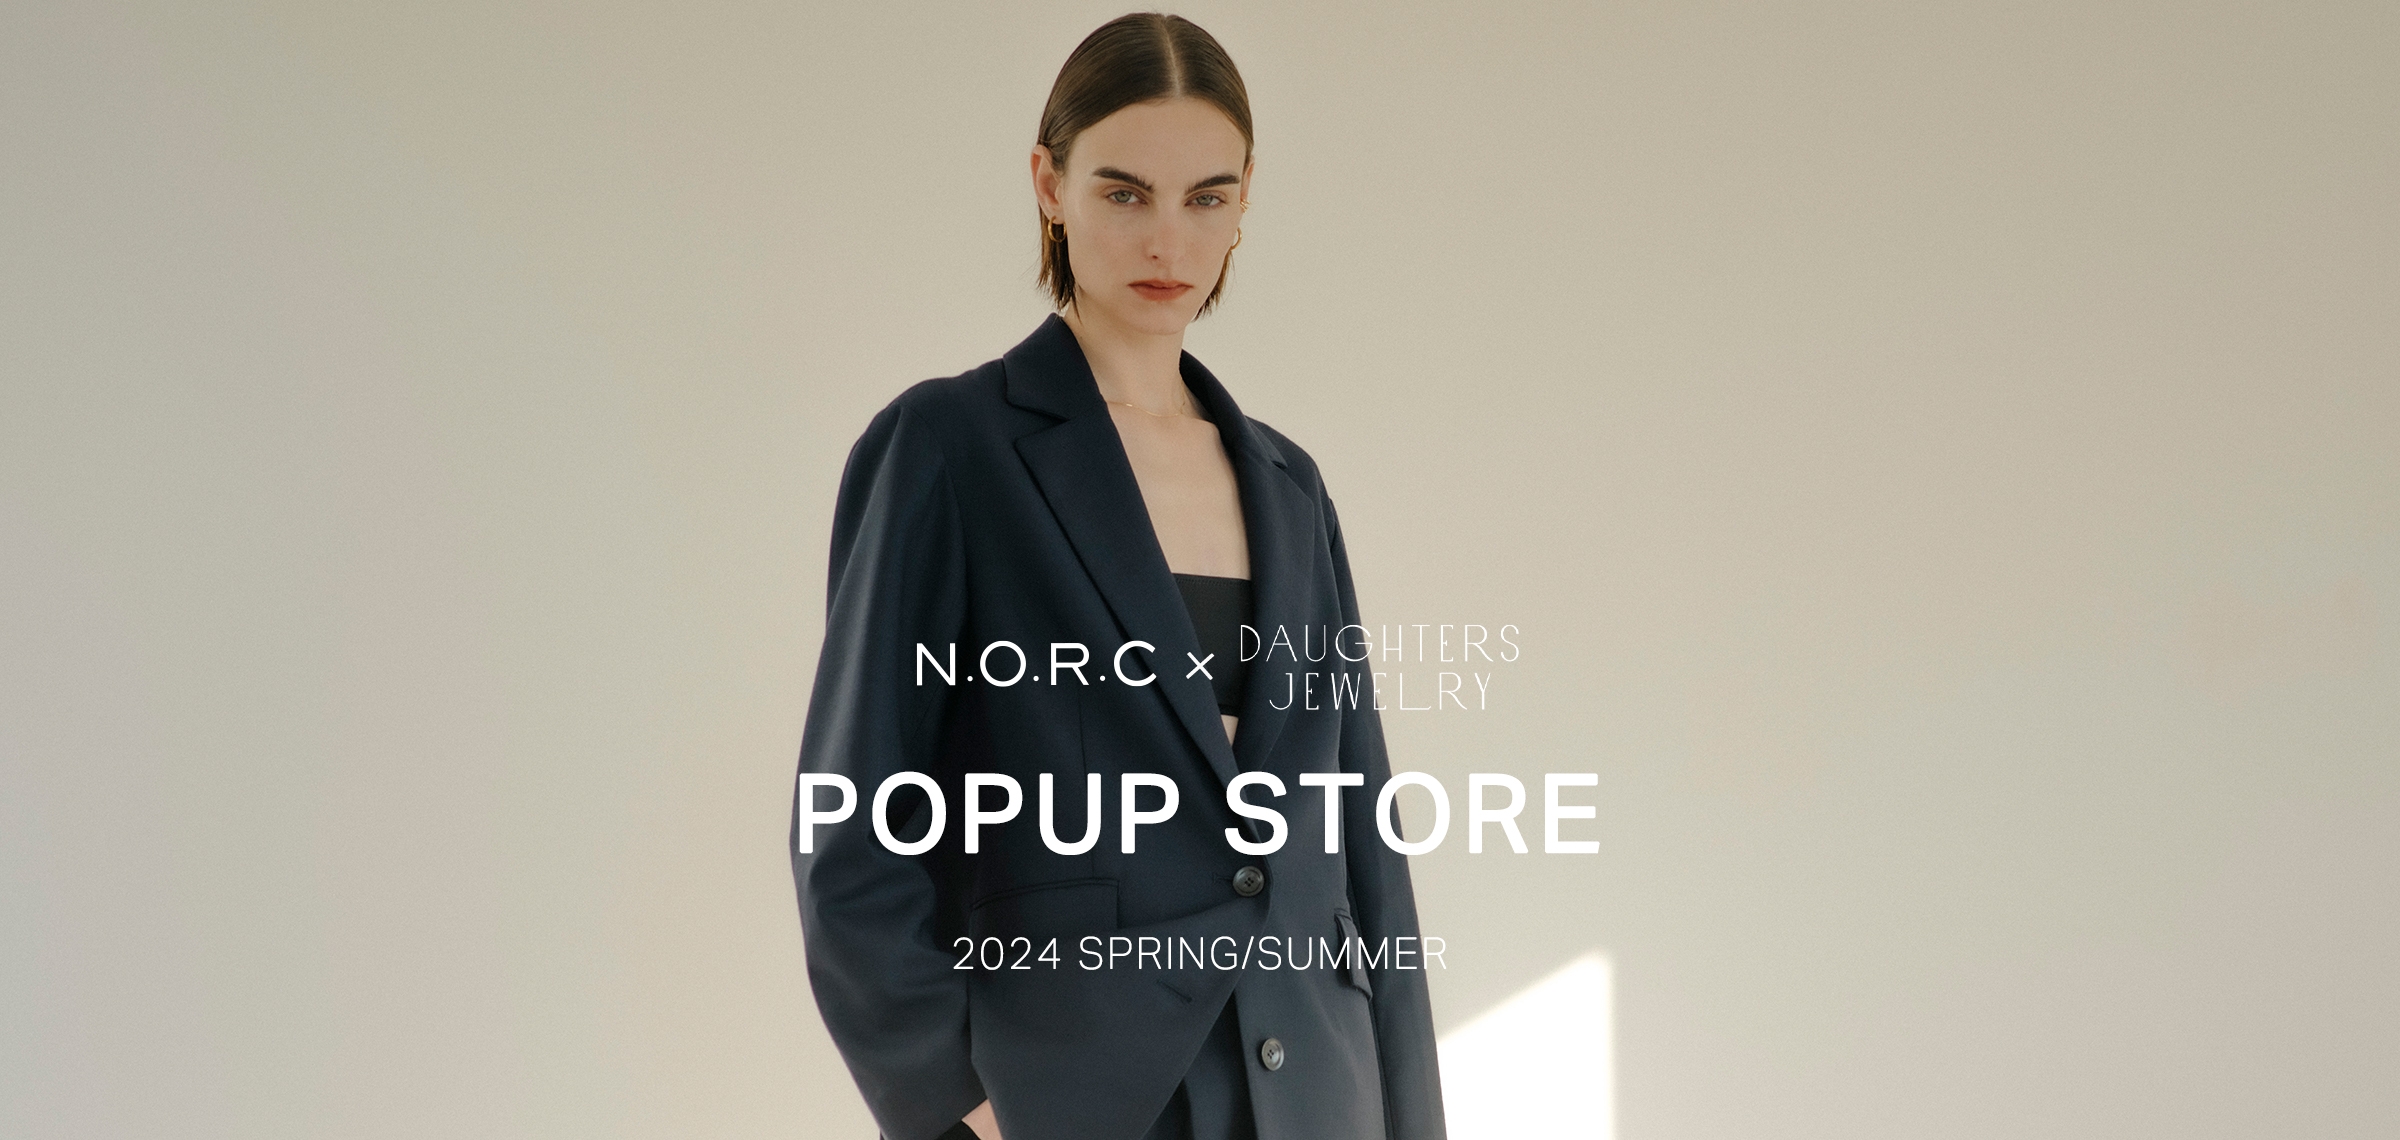 N.O.R.C × DAUGHTERS JEWELRY POPUP STORE 2024 SPRING/SUMMER